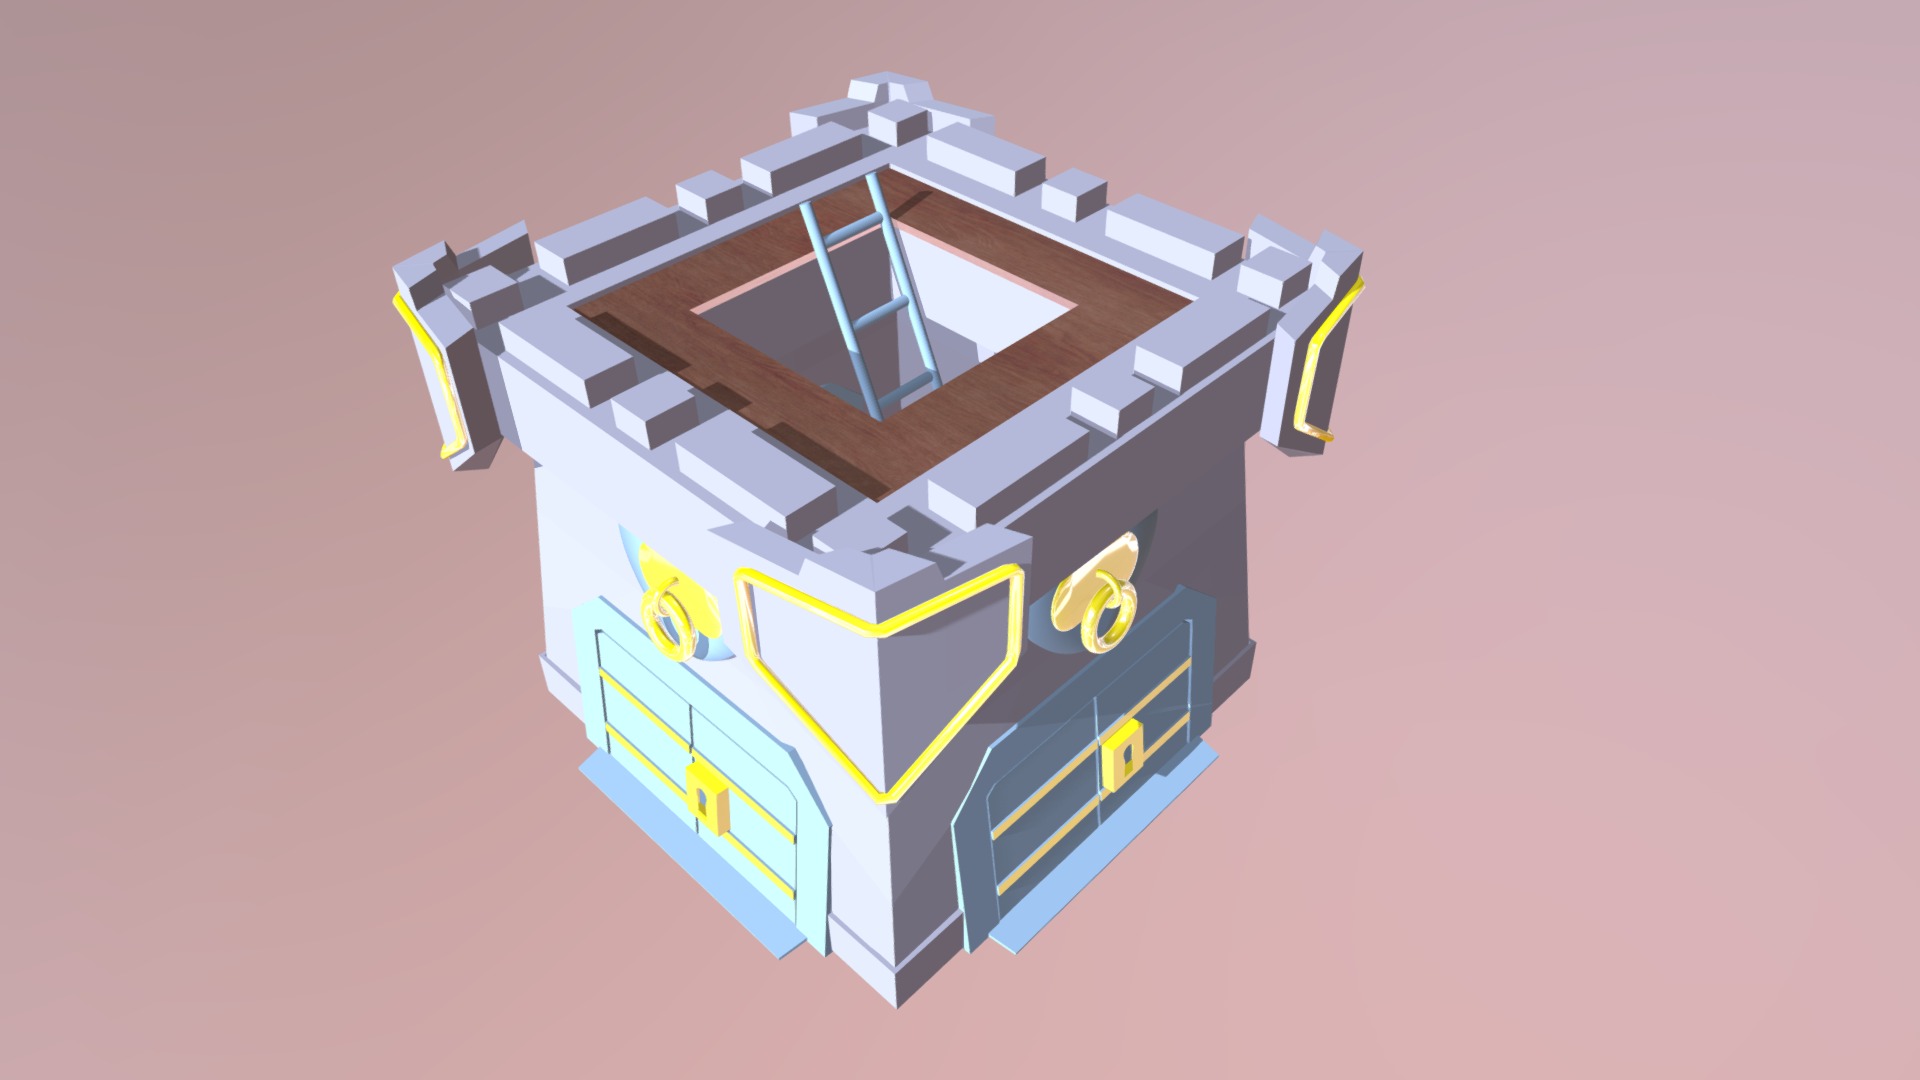 3D model Clan Castle - This is a 3D model of the Clan Castle. The 3D model is about a puzzle cube with a blue and yellow design.